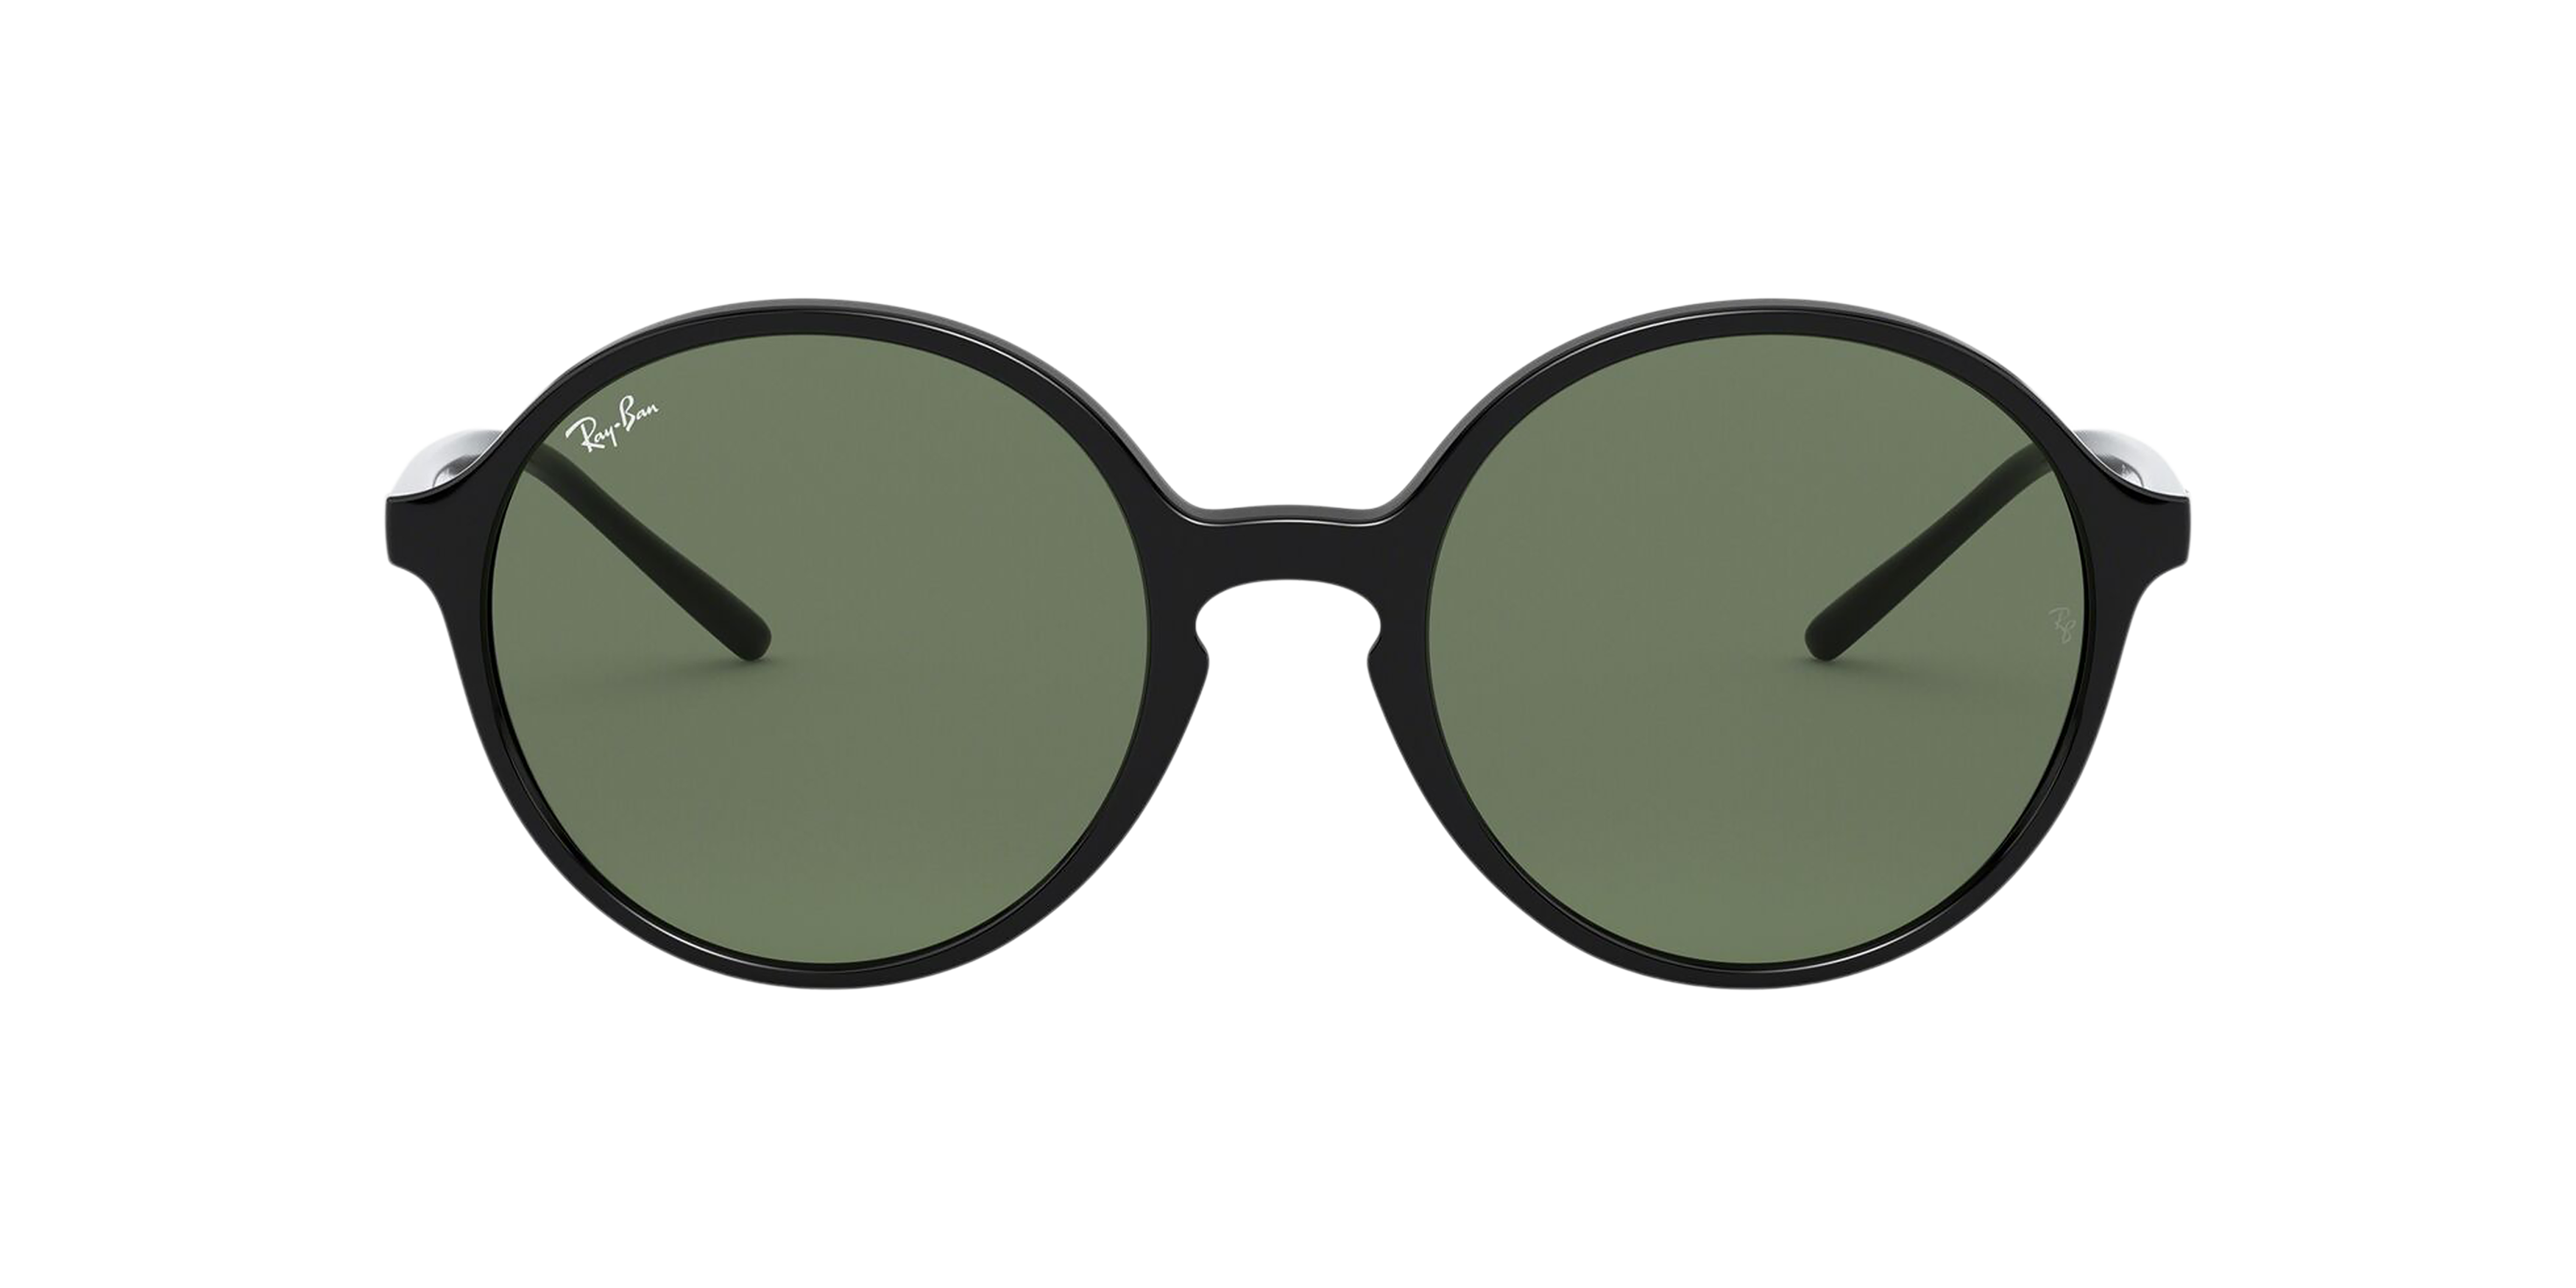 [products.image.front] Ray-Ban RB4304 601/71